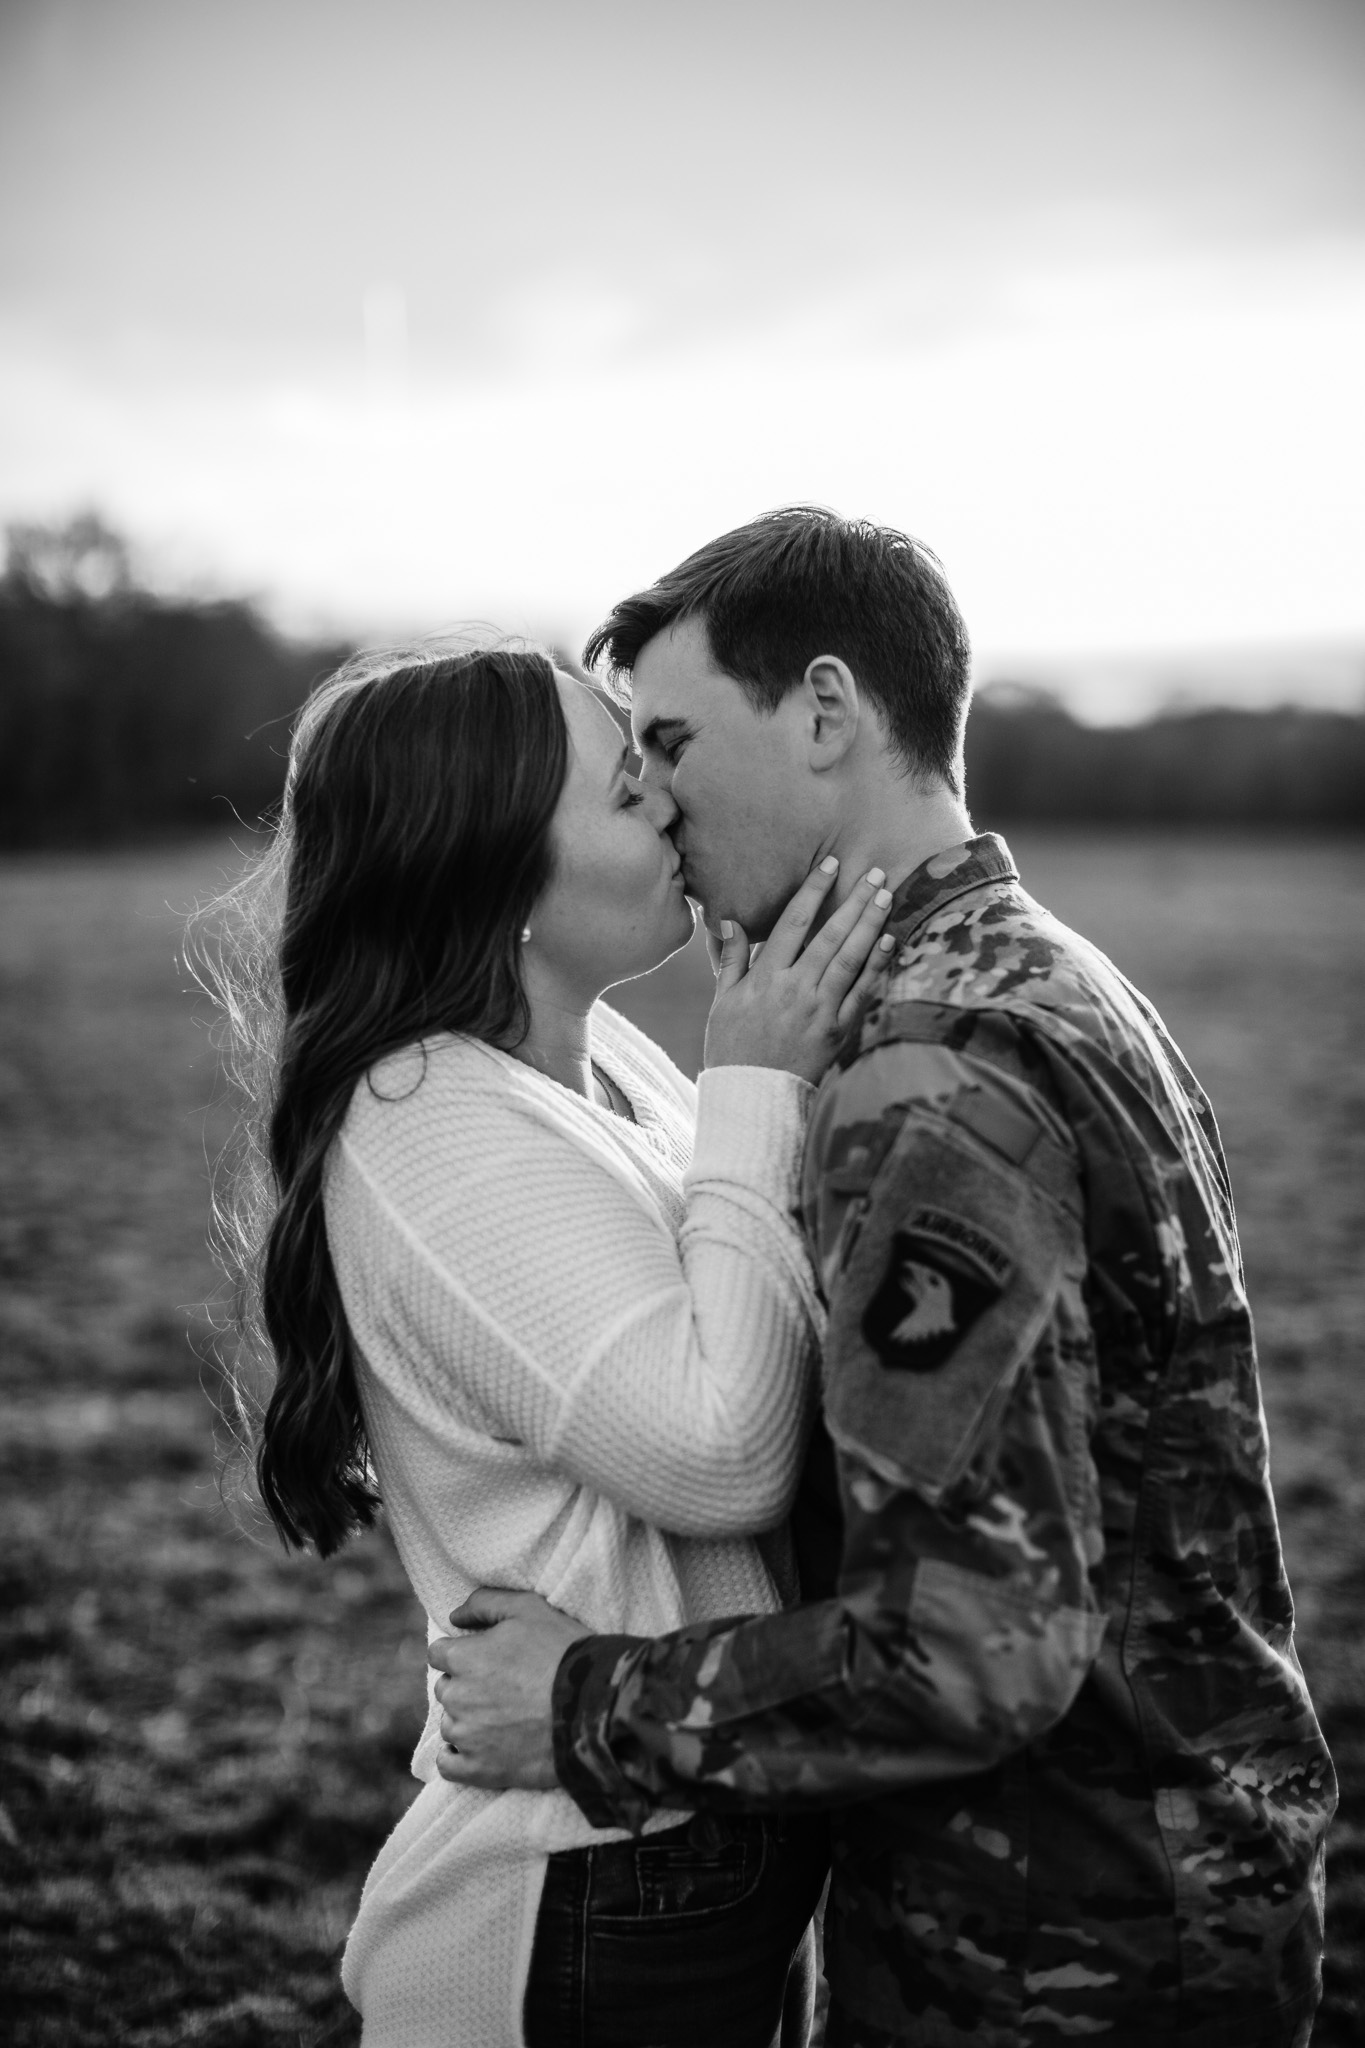 black and white photo of couple kissing with man in uniform